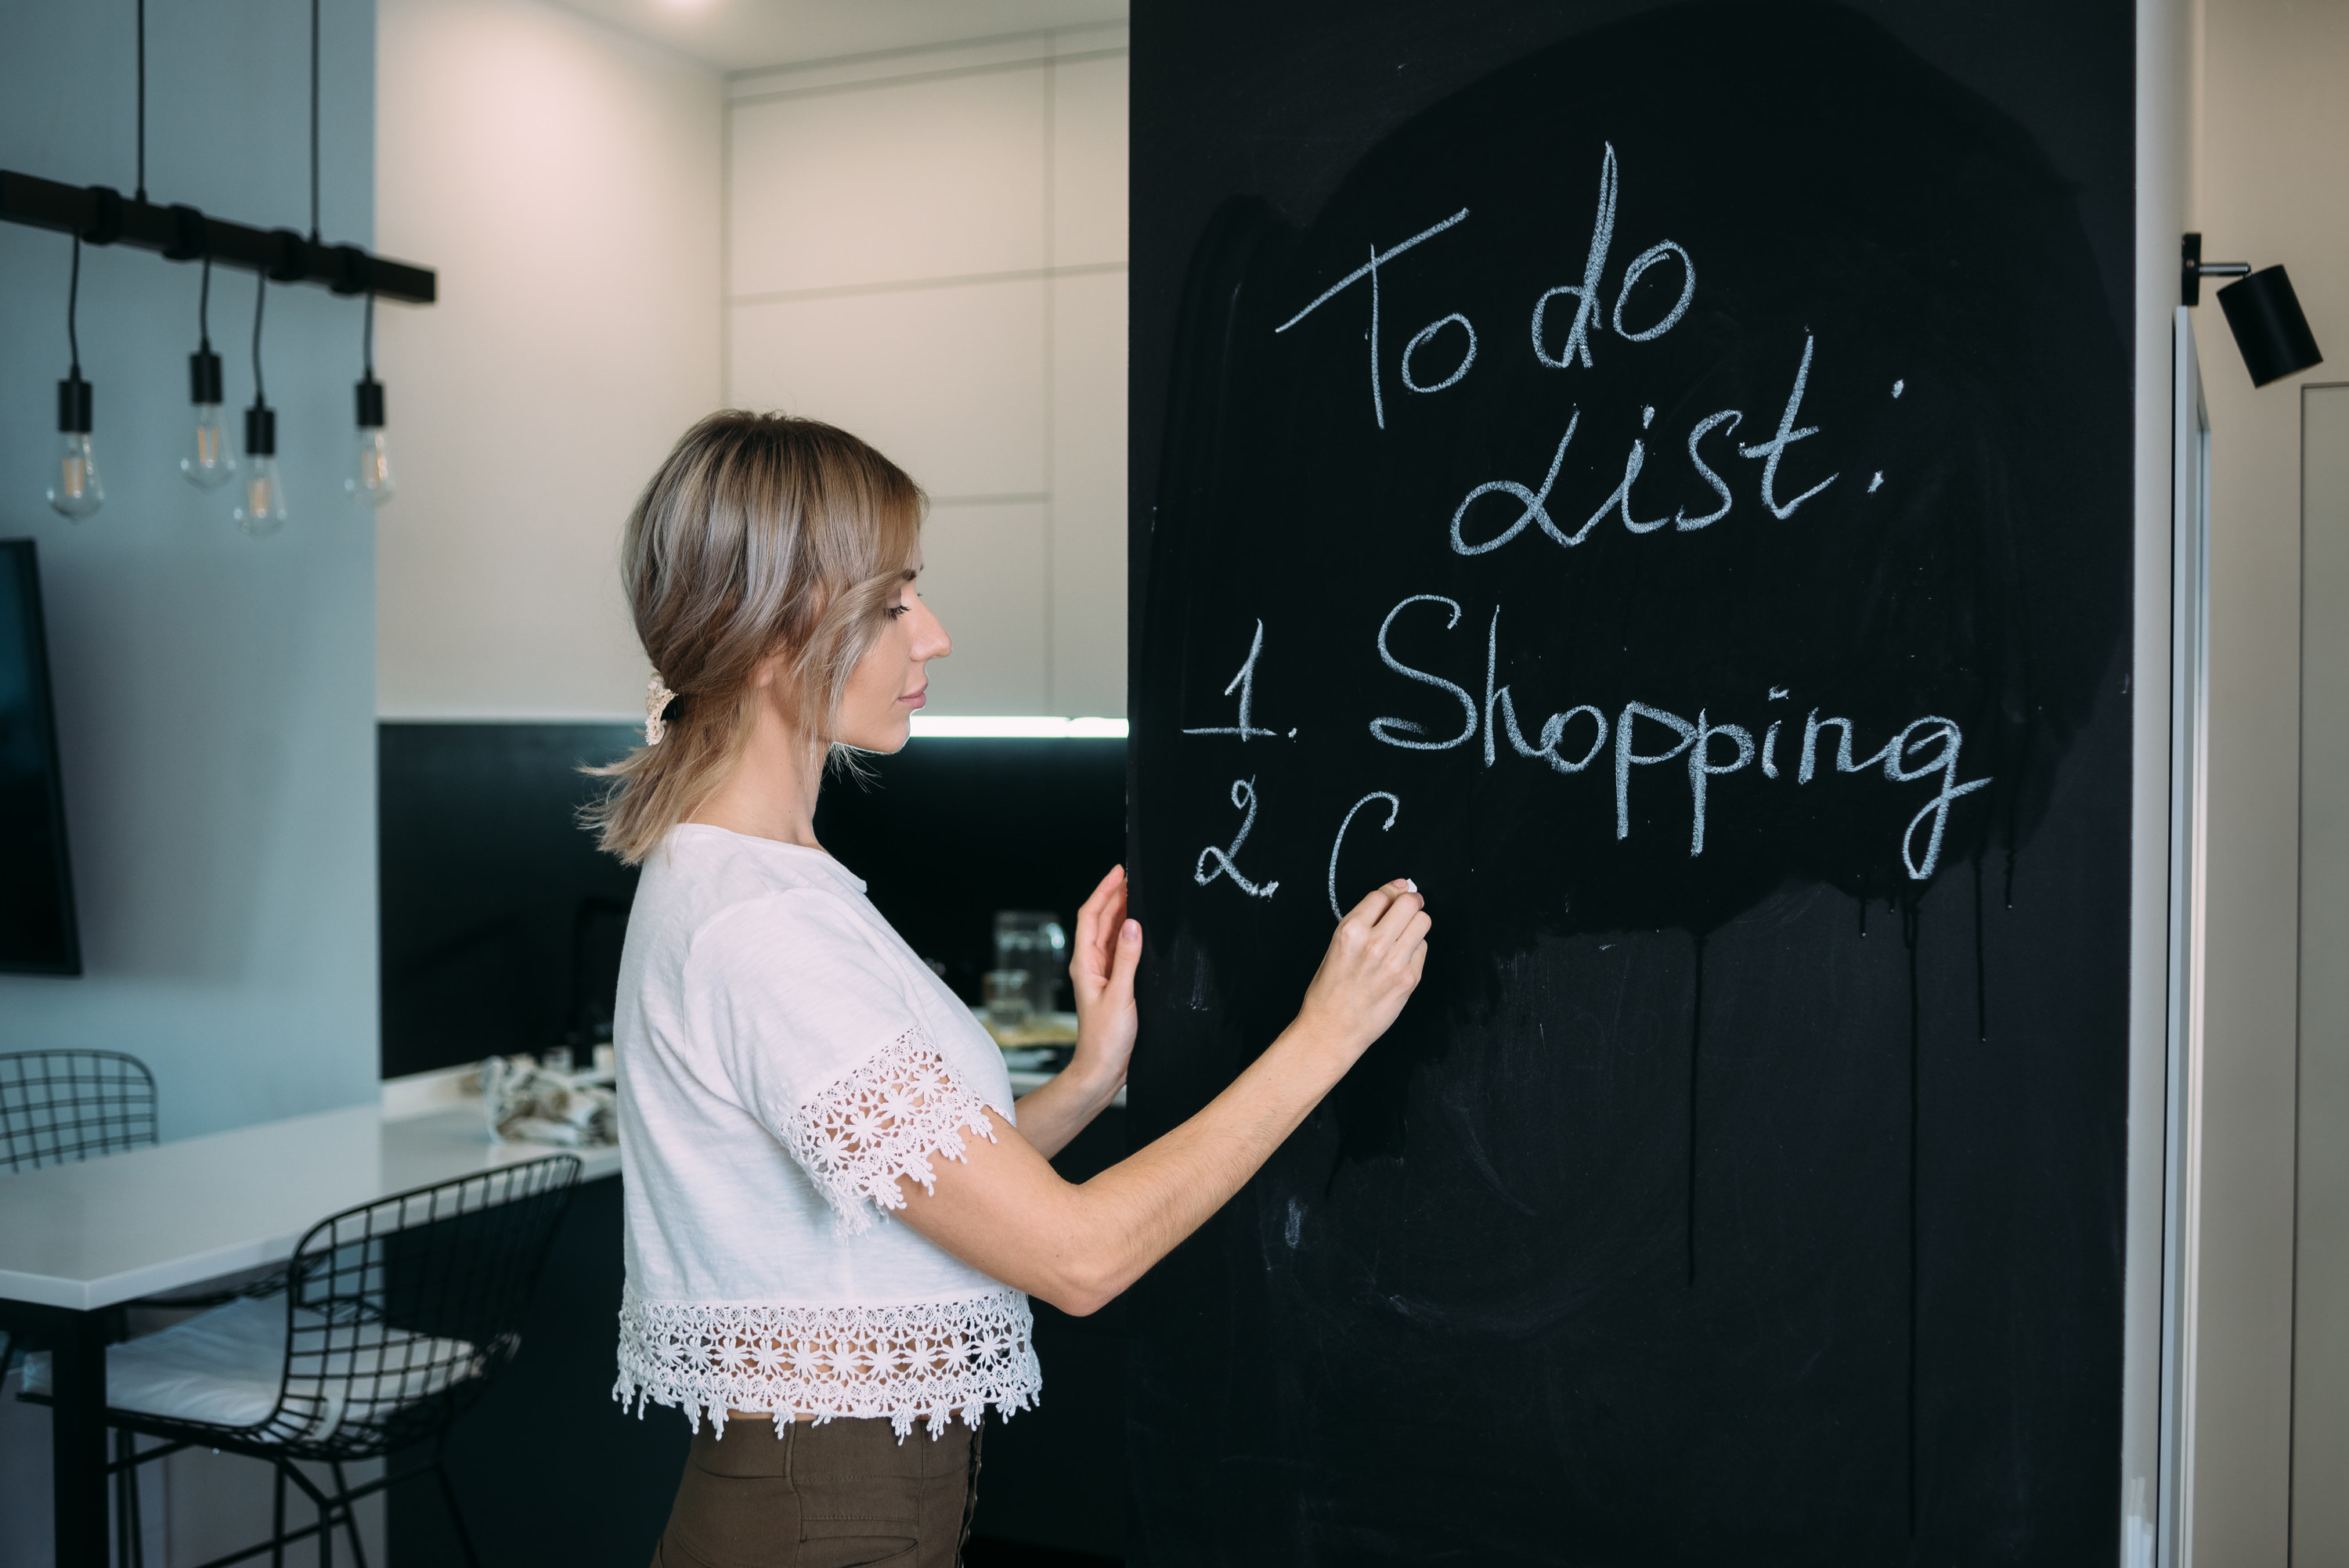 A woman stands in a kitchen, writing in chalk on a large blackboard wall